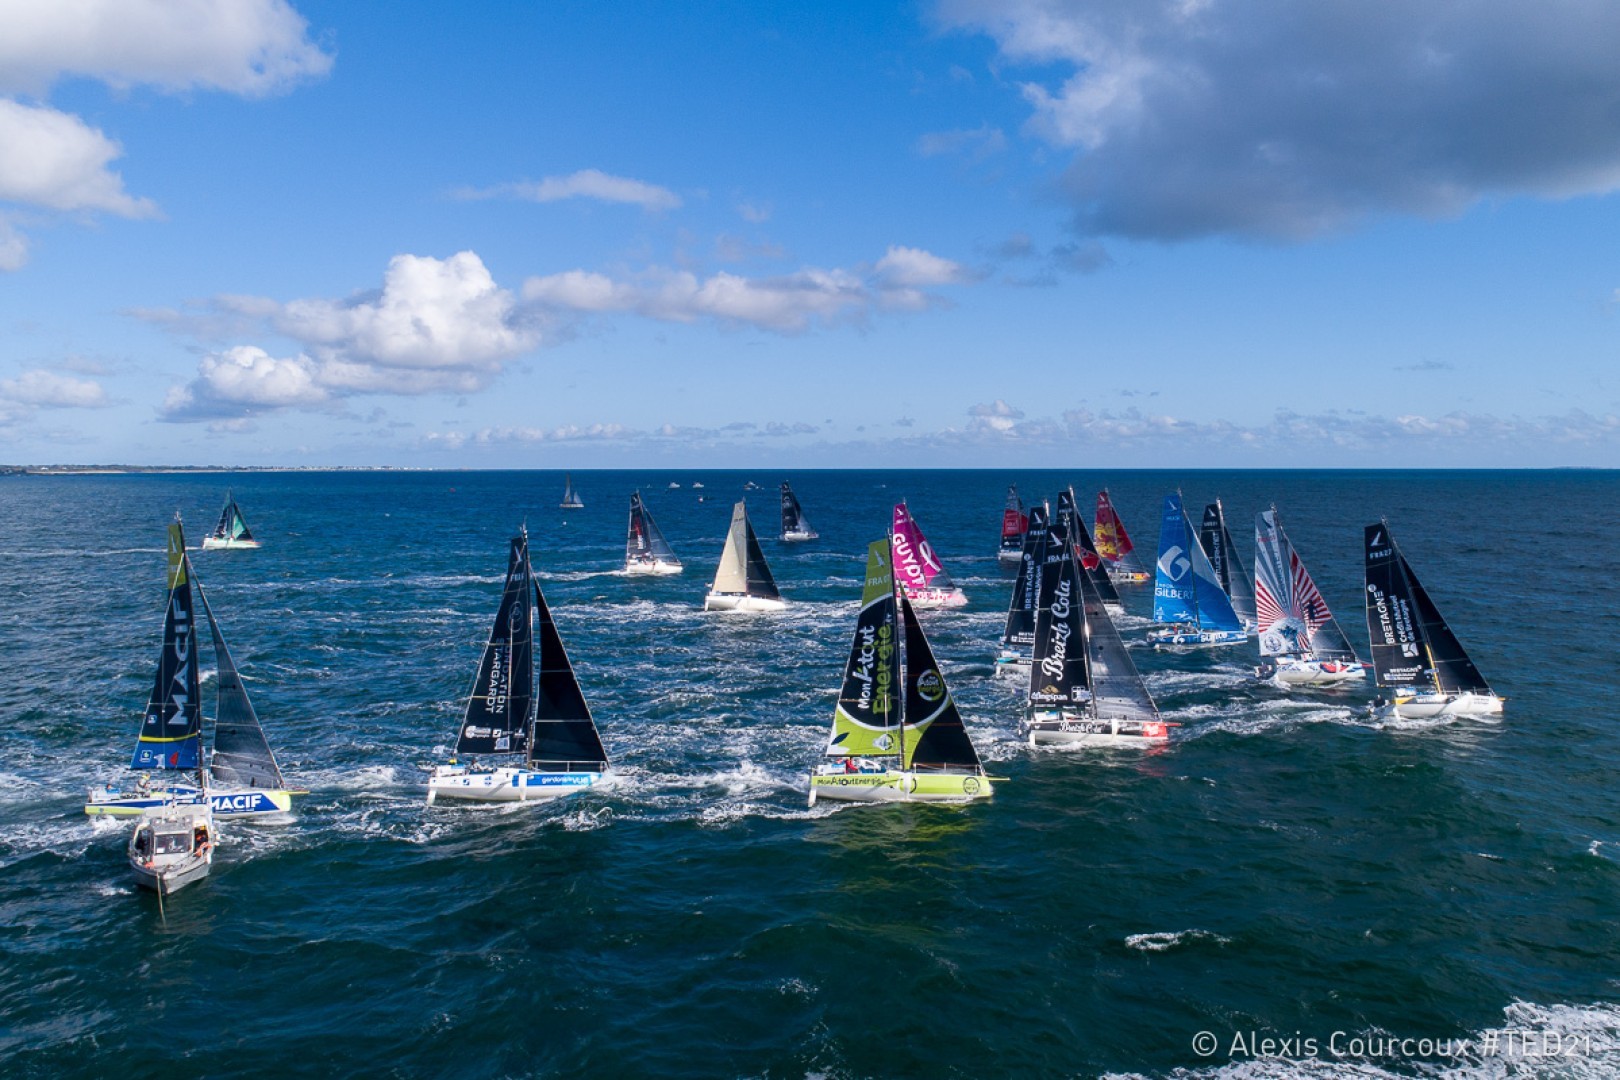 Entries are open for the 16th edition of the Transat Paprec. © Alexis Courcoux